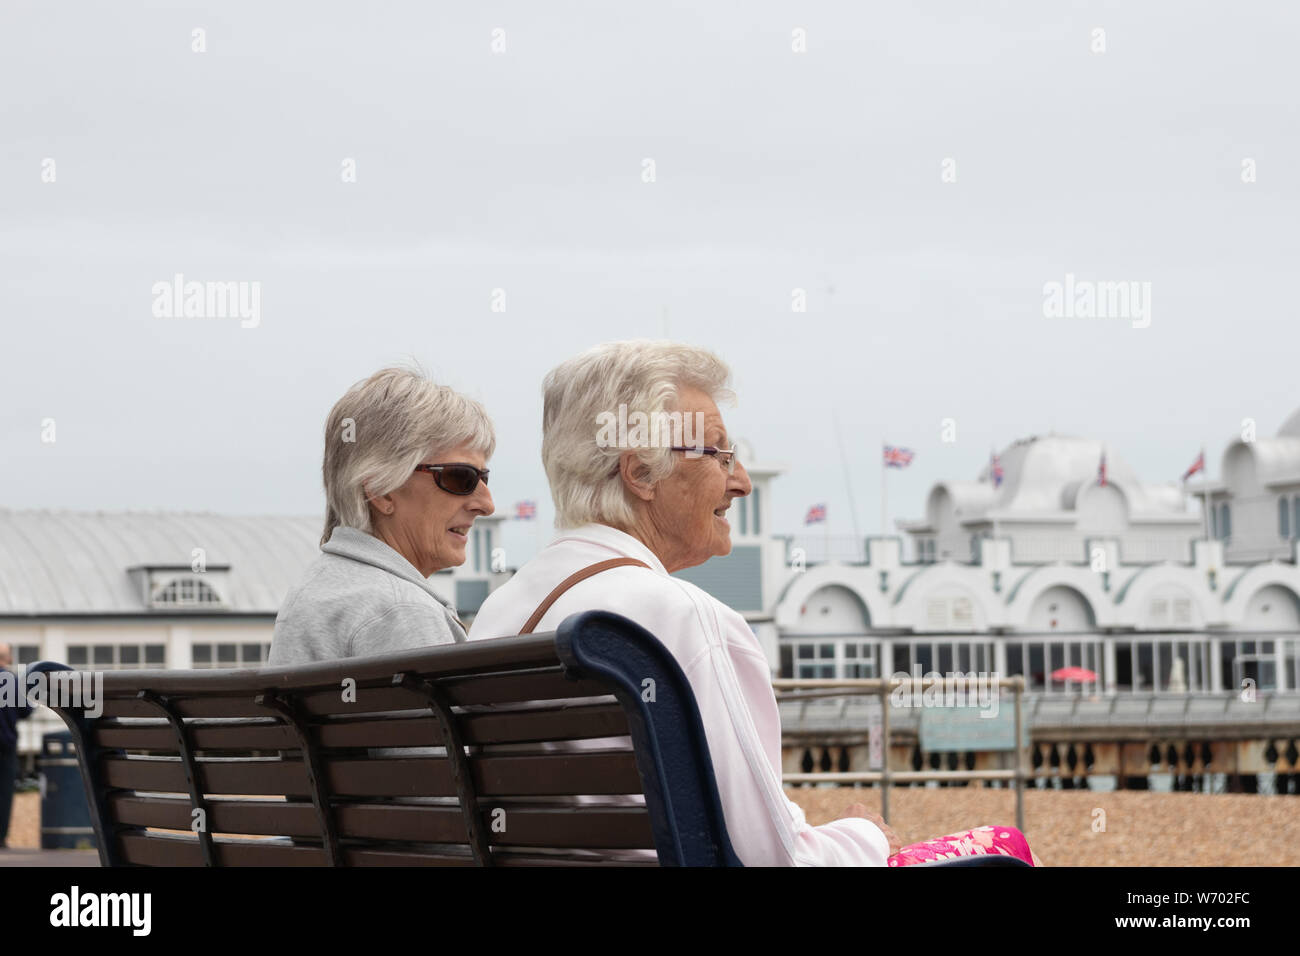 Two elderly ladies or women sat on a bench talking at the english seaside Stock Photo